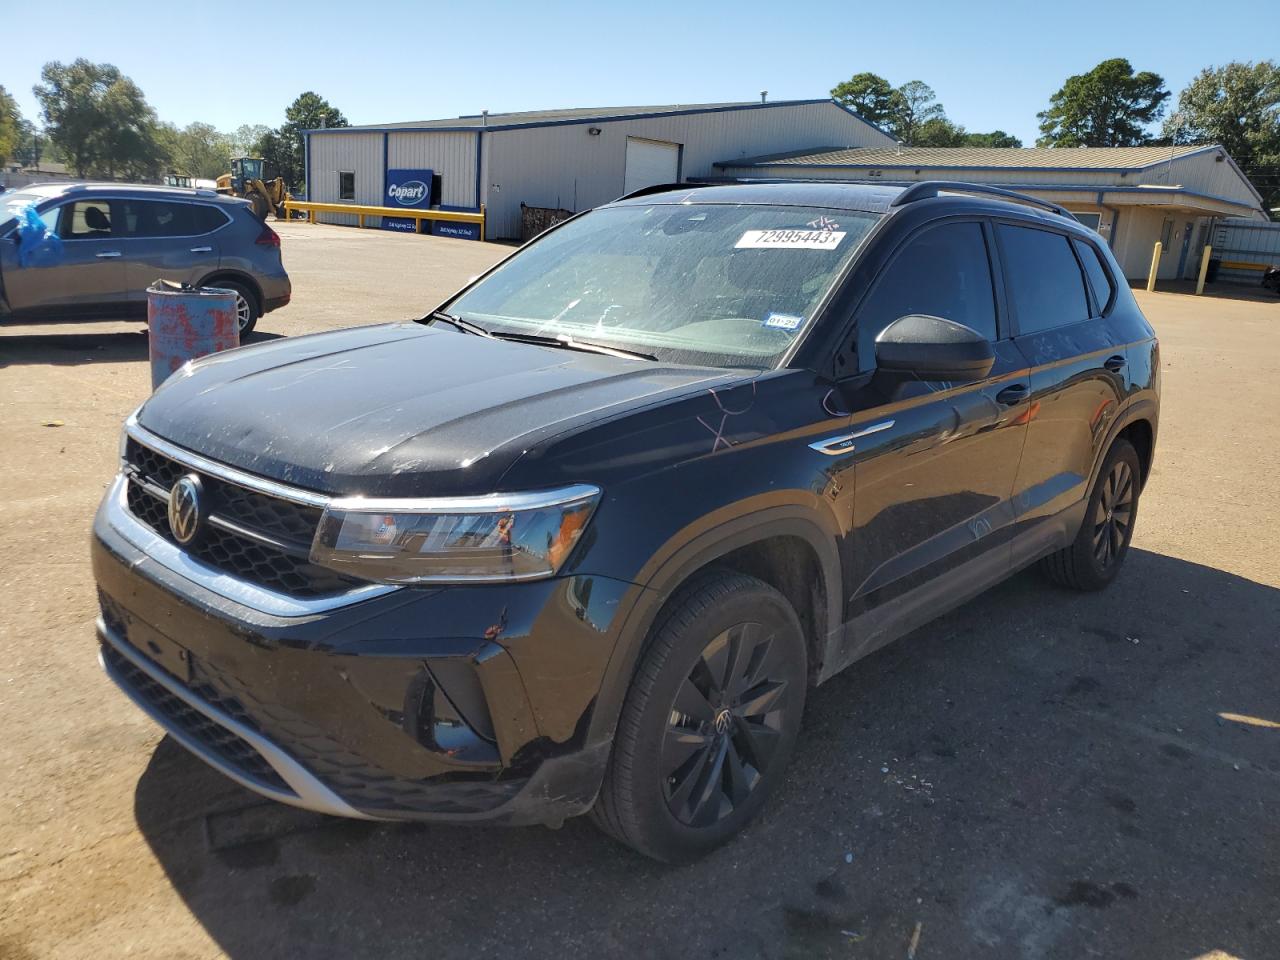 3VVDX7B25PM****** Salvage and Wrecked 2023 Volkswagen Taos in TX - Longview